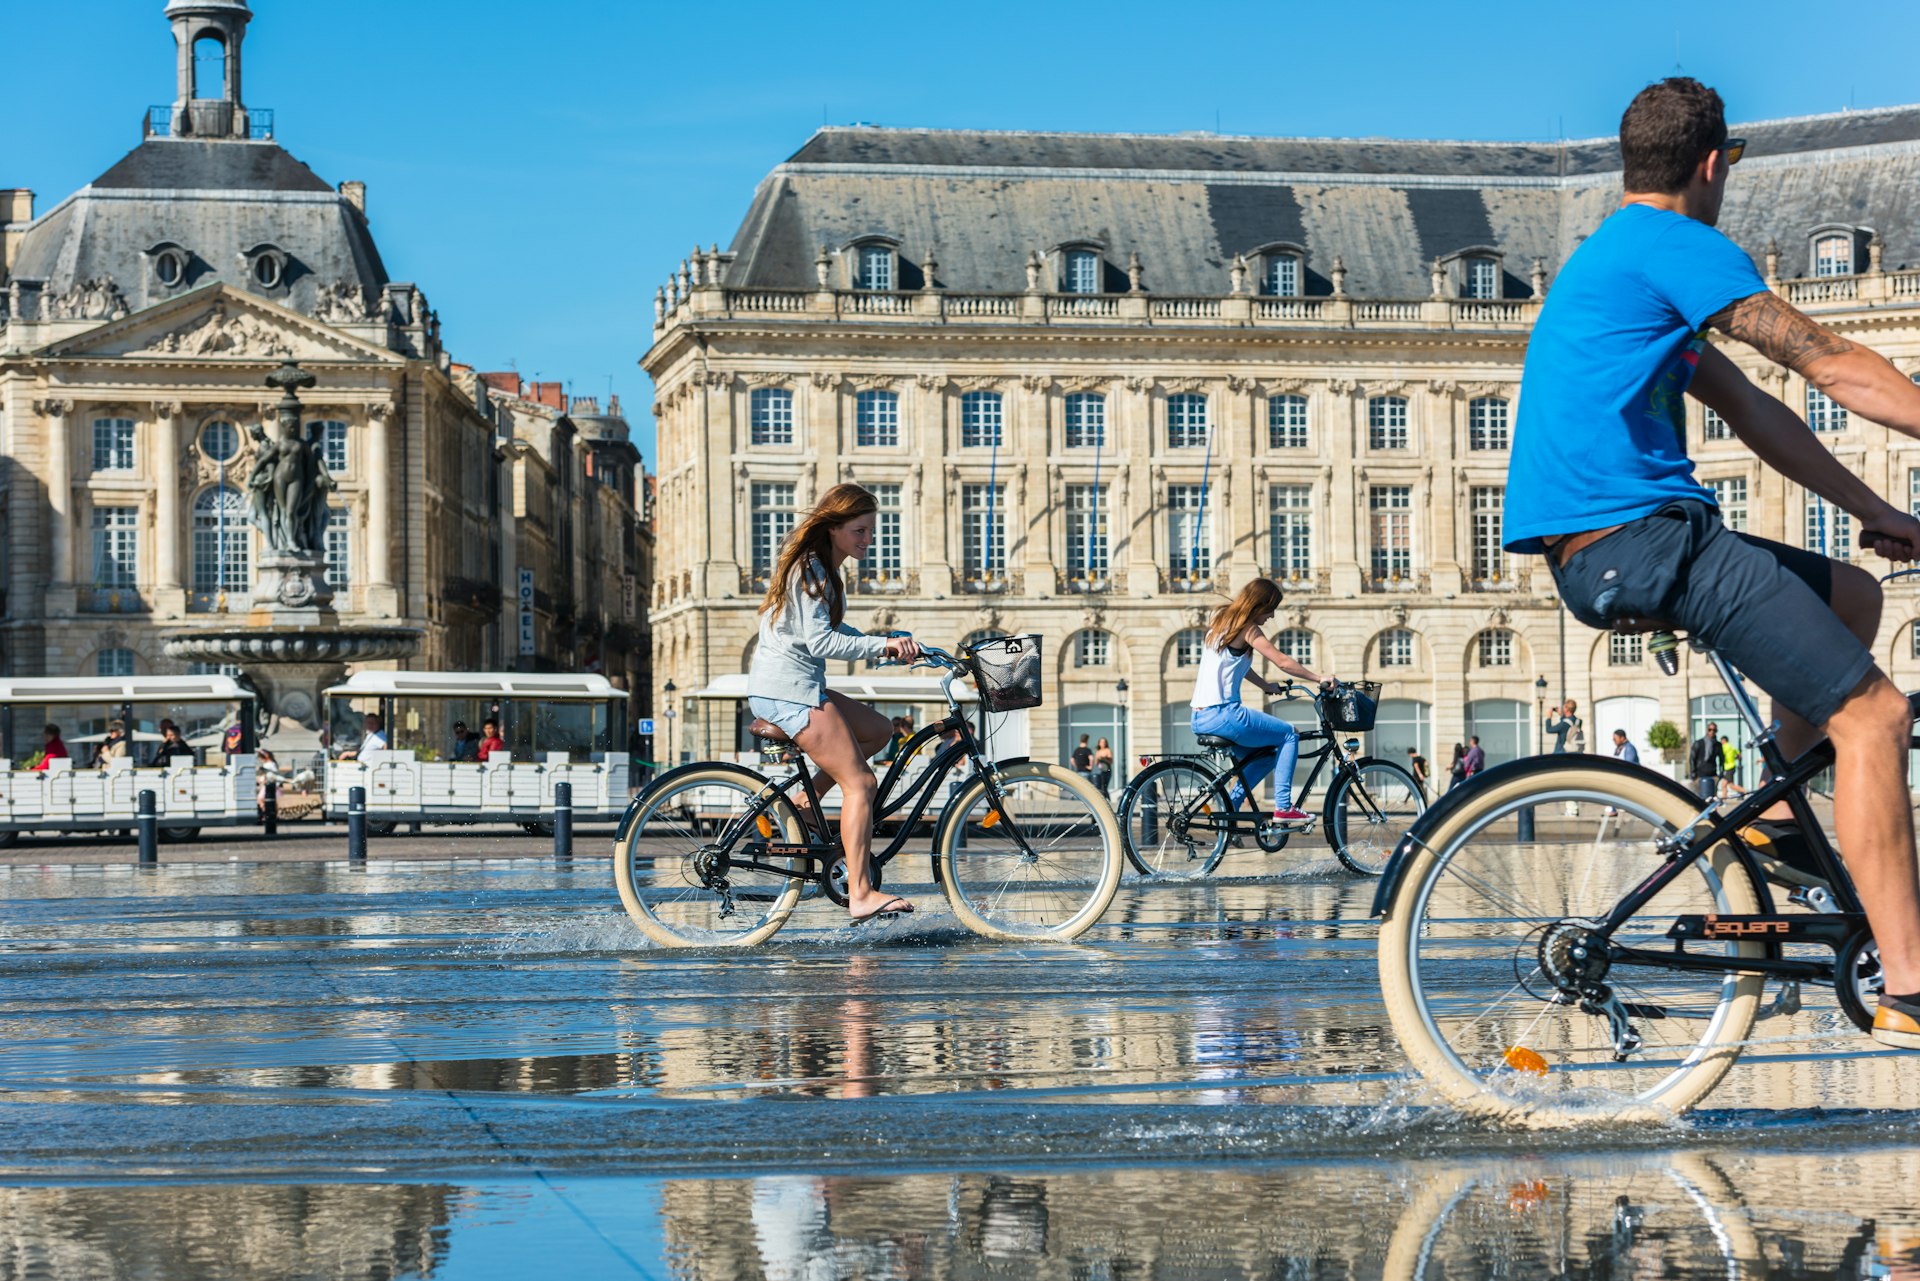 People riding bicycles in the mirror fountain in front of the Palais de la Bourse in Bordeaux, France